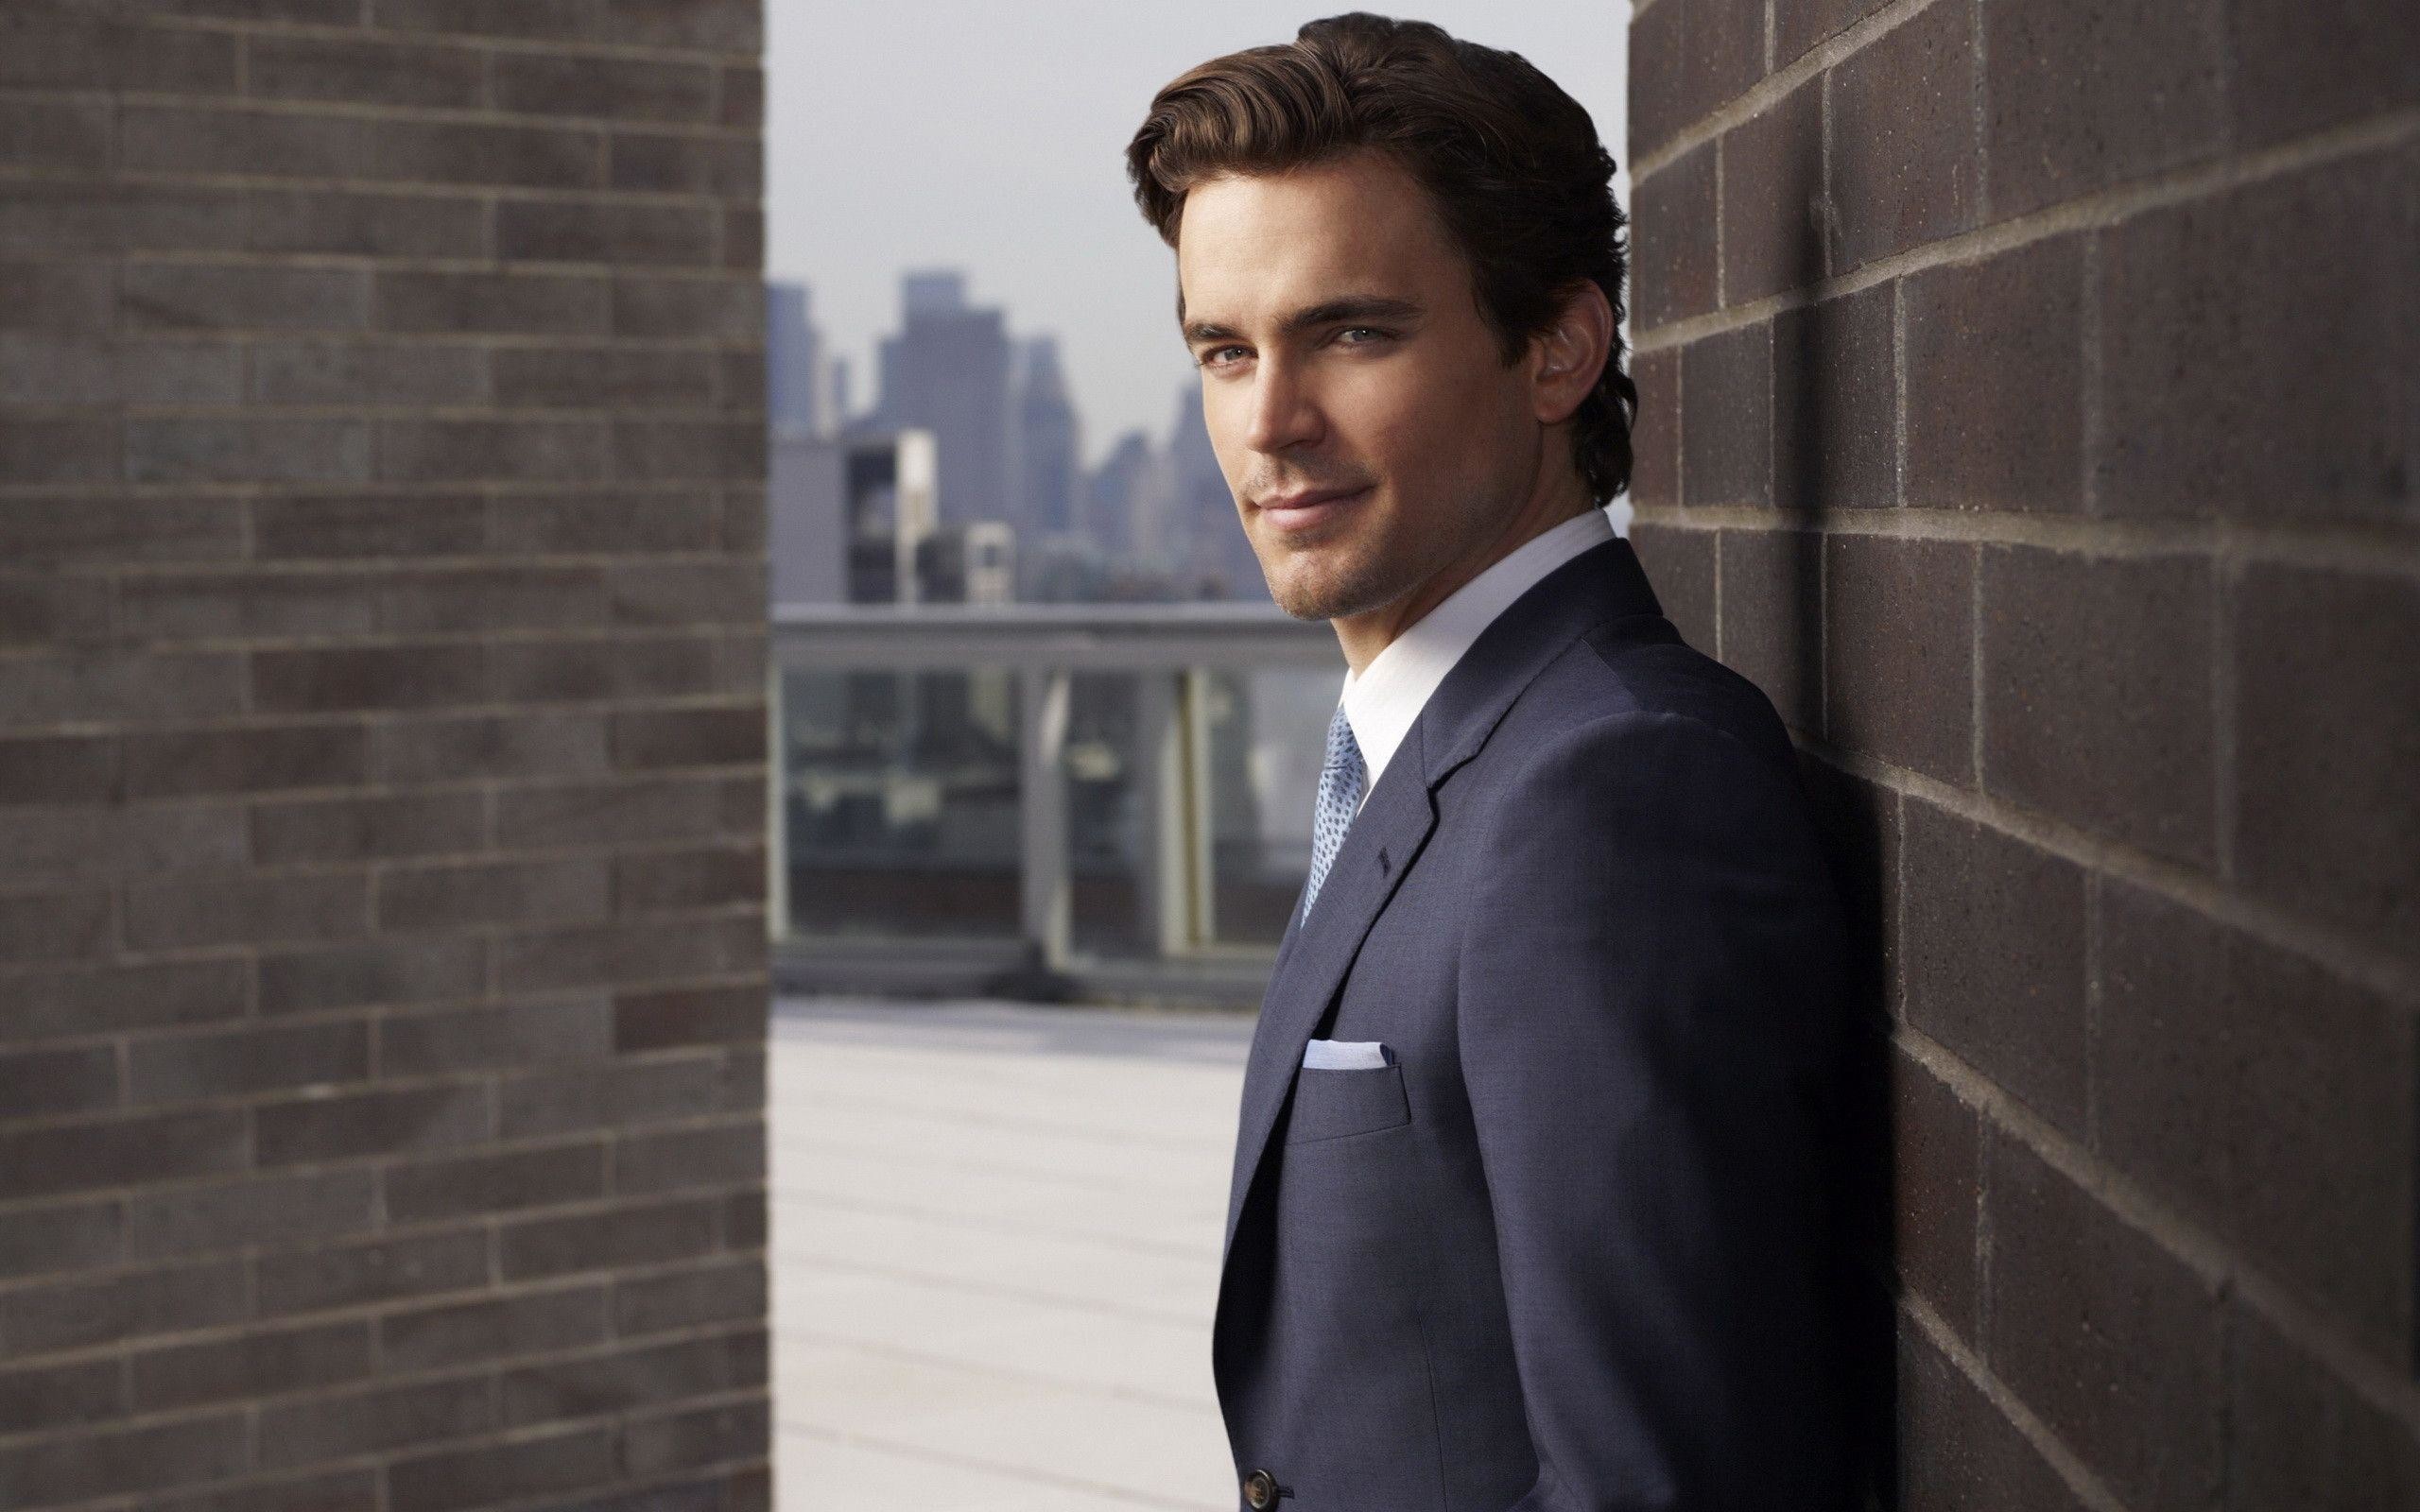 2560x1600 Matthew Bomer wallpapers and images - wallpapers, pictures, photos